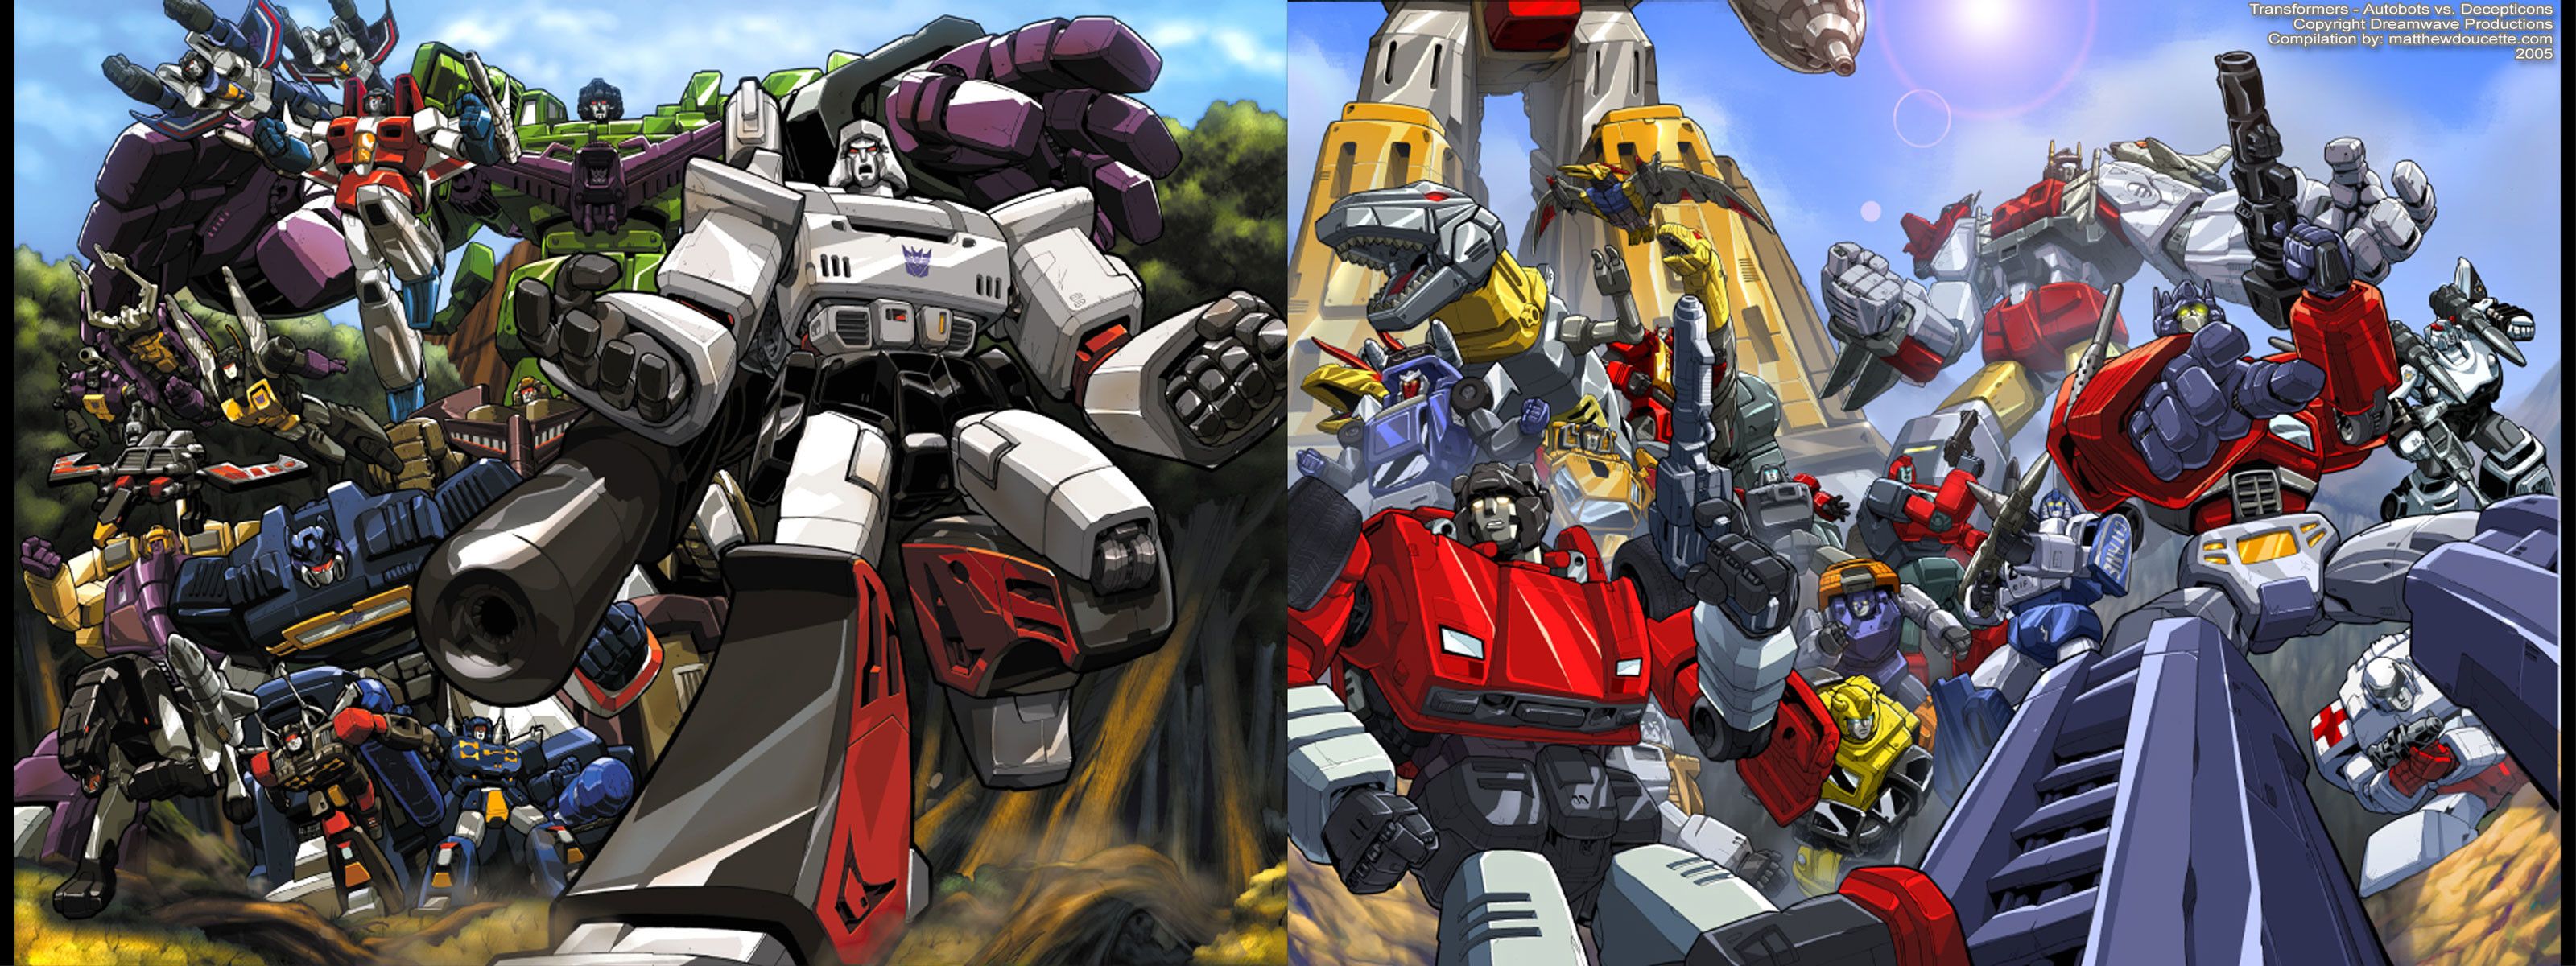 Transformers Wallpapers G1 Themed  Transformers G1  Bots Vs Cons